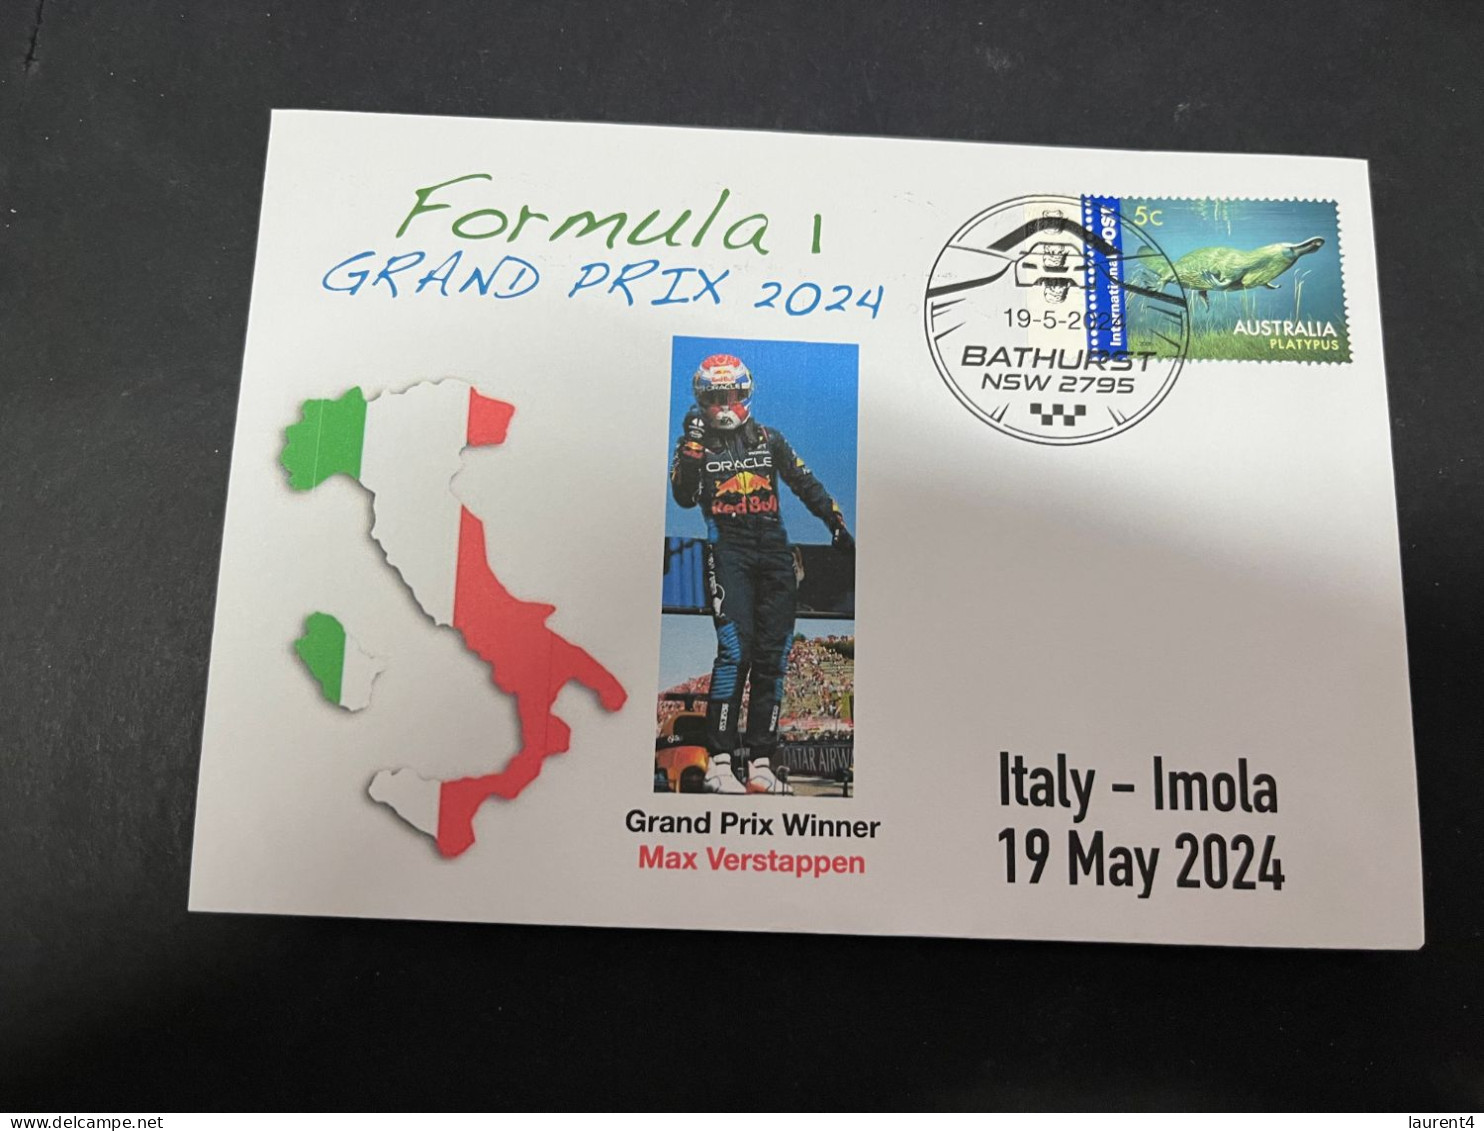 20-5-2024 (2 Z 42) Formula One - 2024 - Italy Imola Grand Prix - Winner Max Verstappen (19 May 2024) Platypus Stamp - Automobile